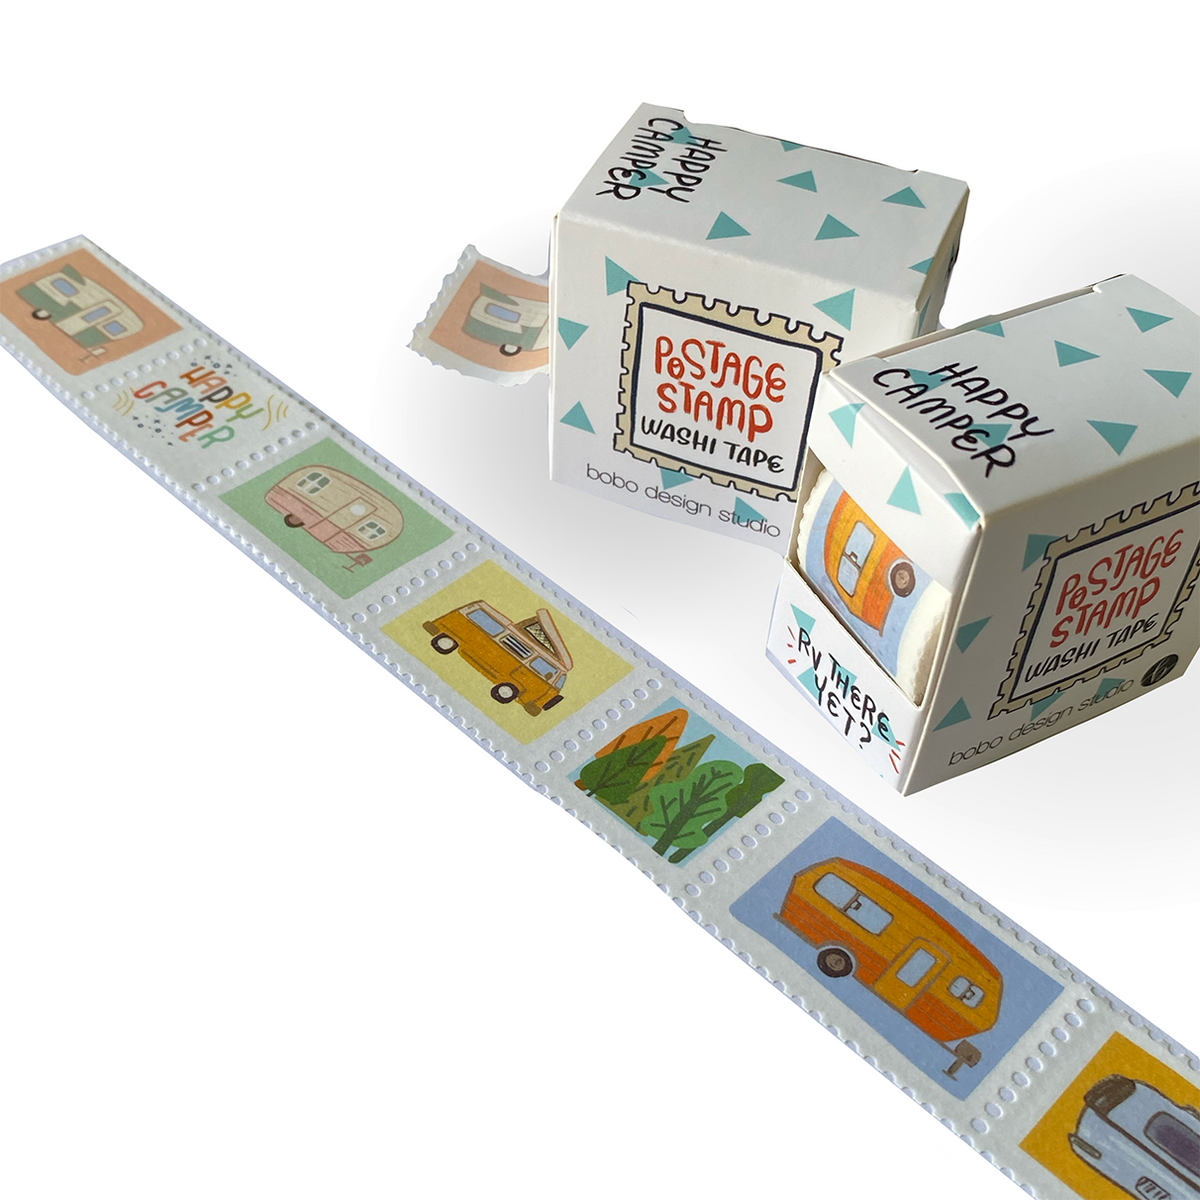 Happy Camper Postage Stamp Washi Tape by bobo design studio has little perforated stamps featuring different campers and RVs. Perfect for the RV traveler in your life.